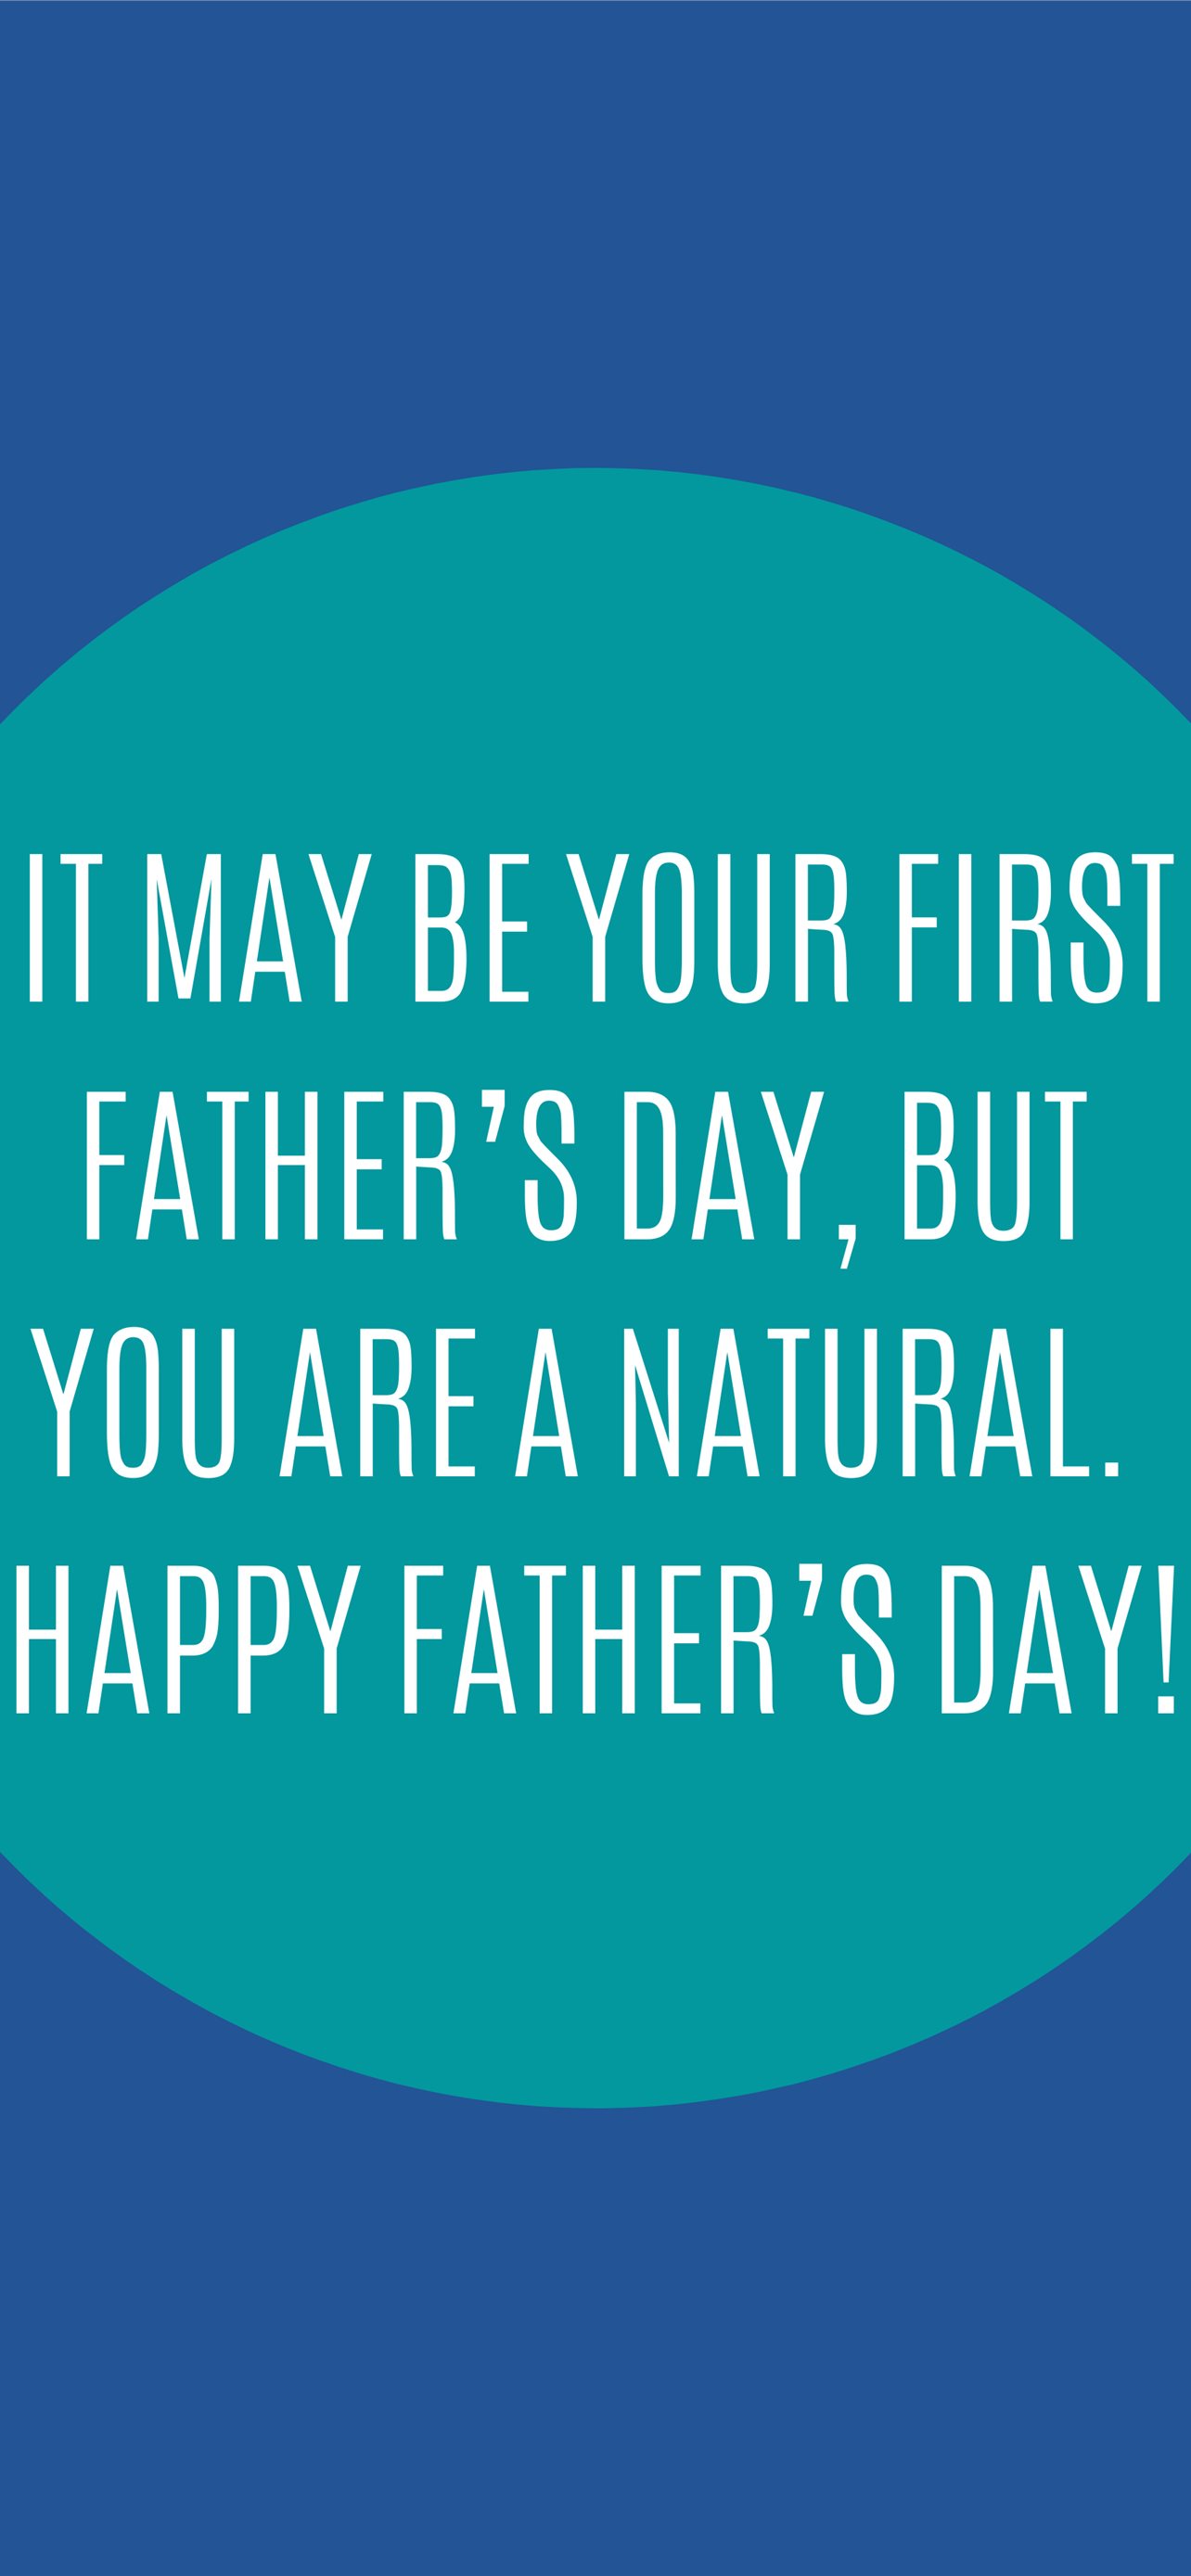 Fathers Day Images Download Wallpapers